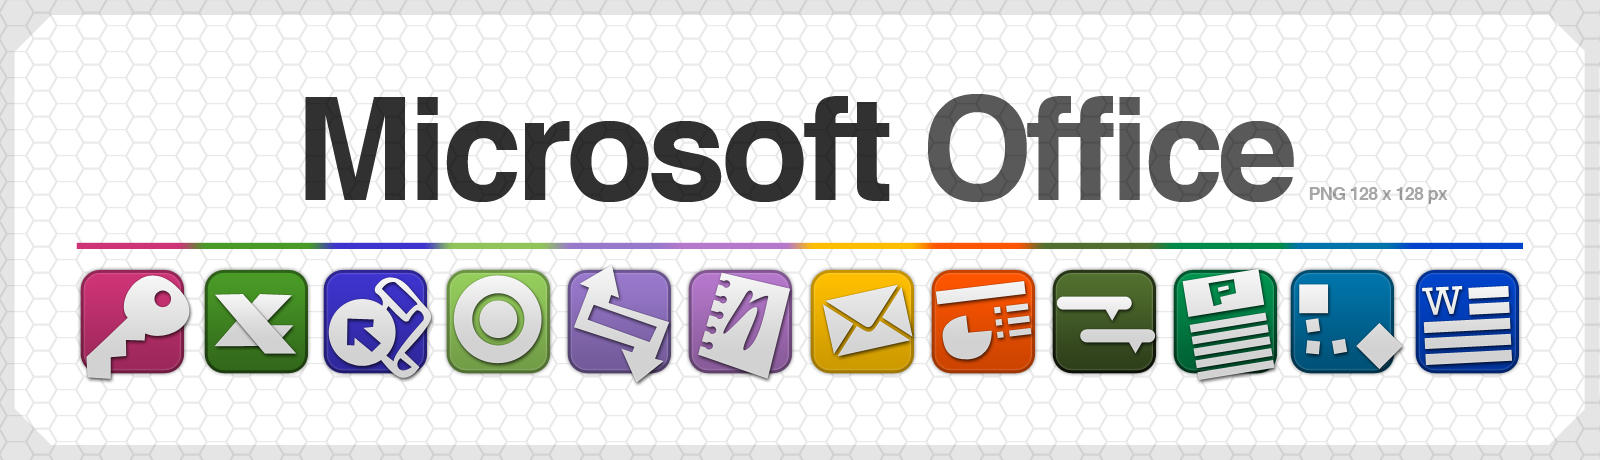 microsoft office free clipart for mac - photo #42